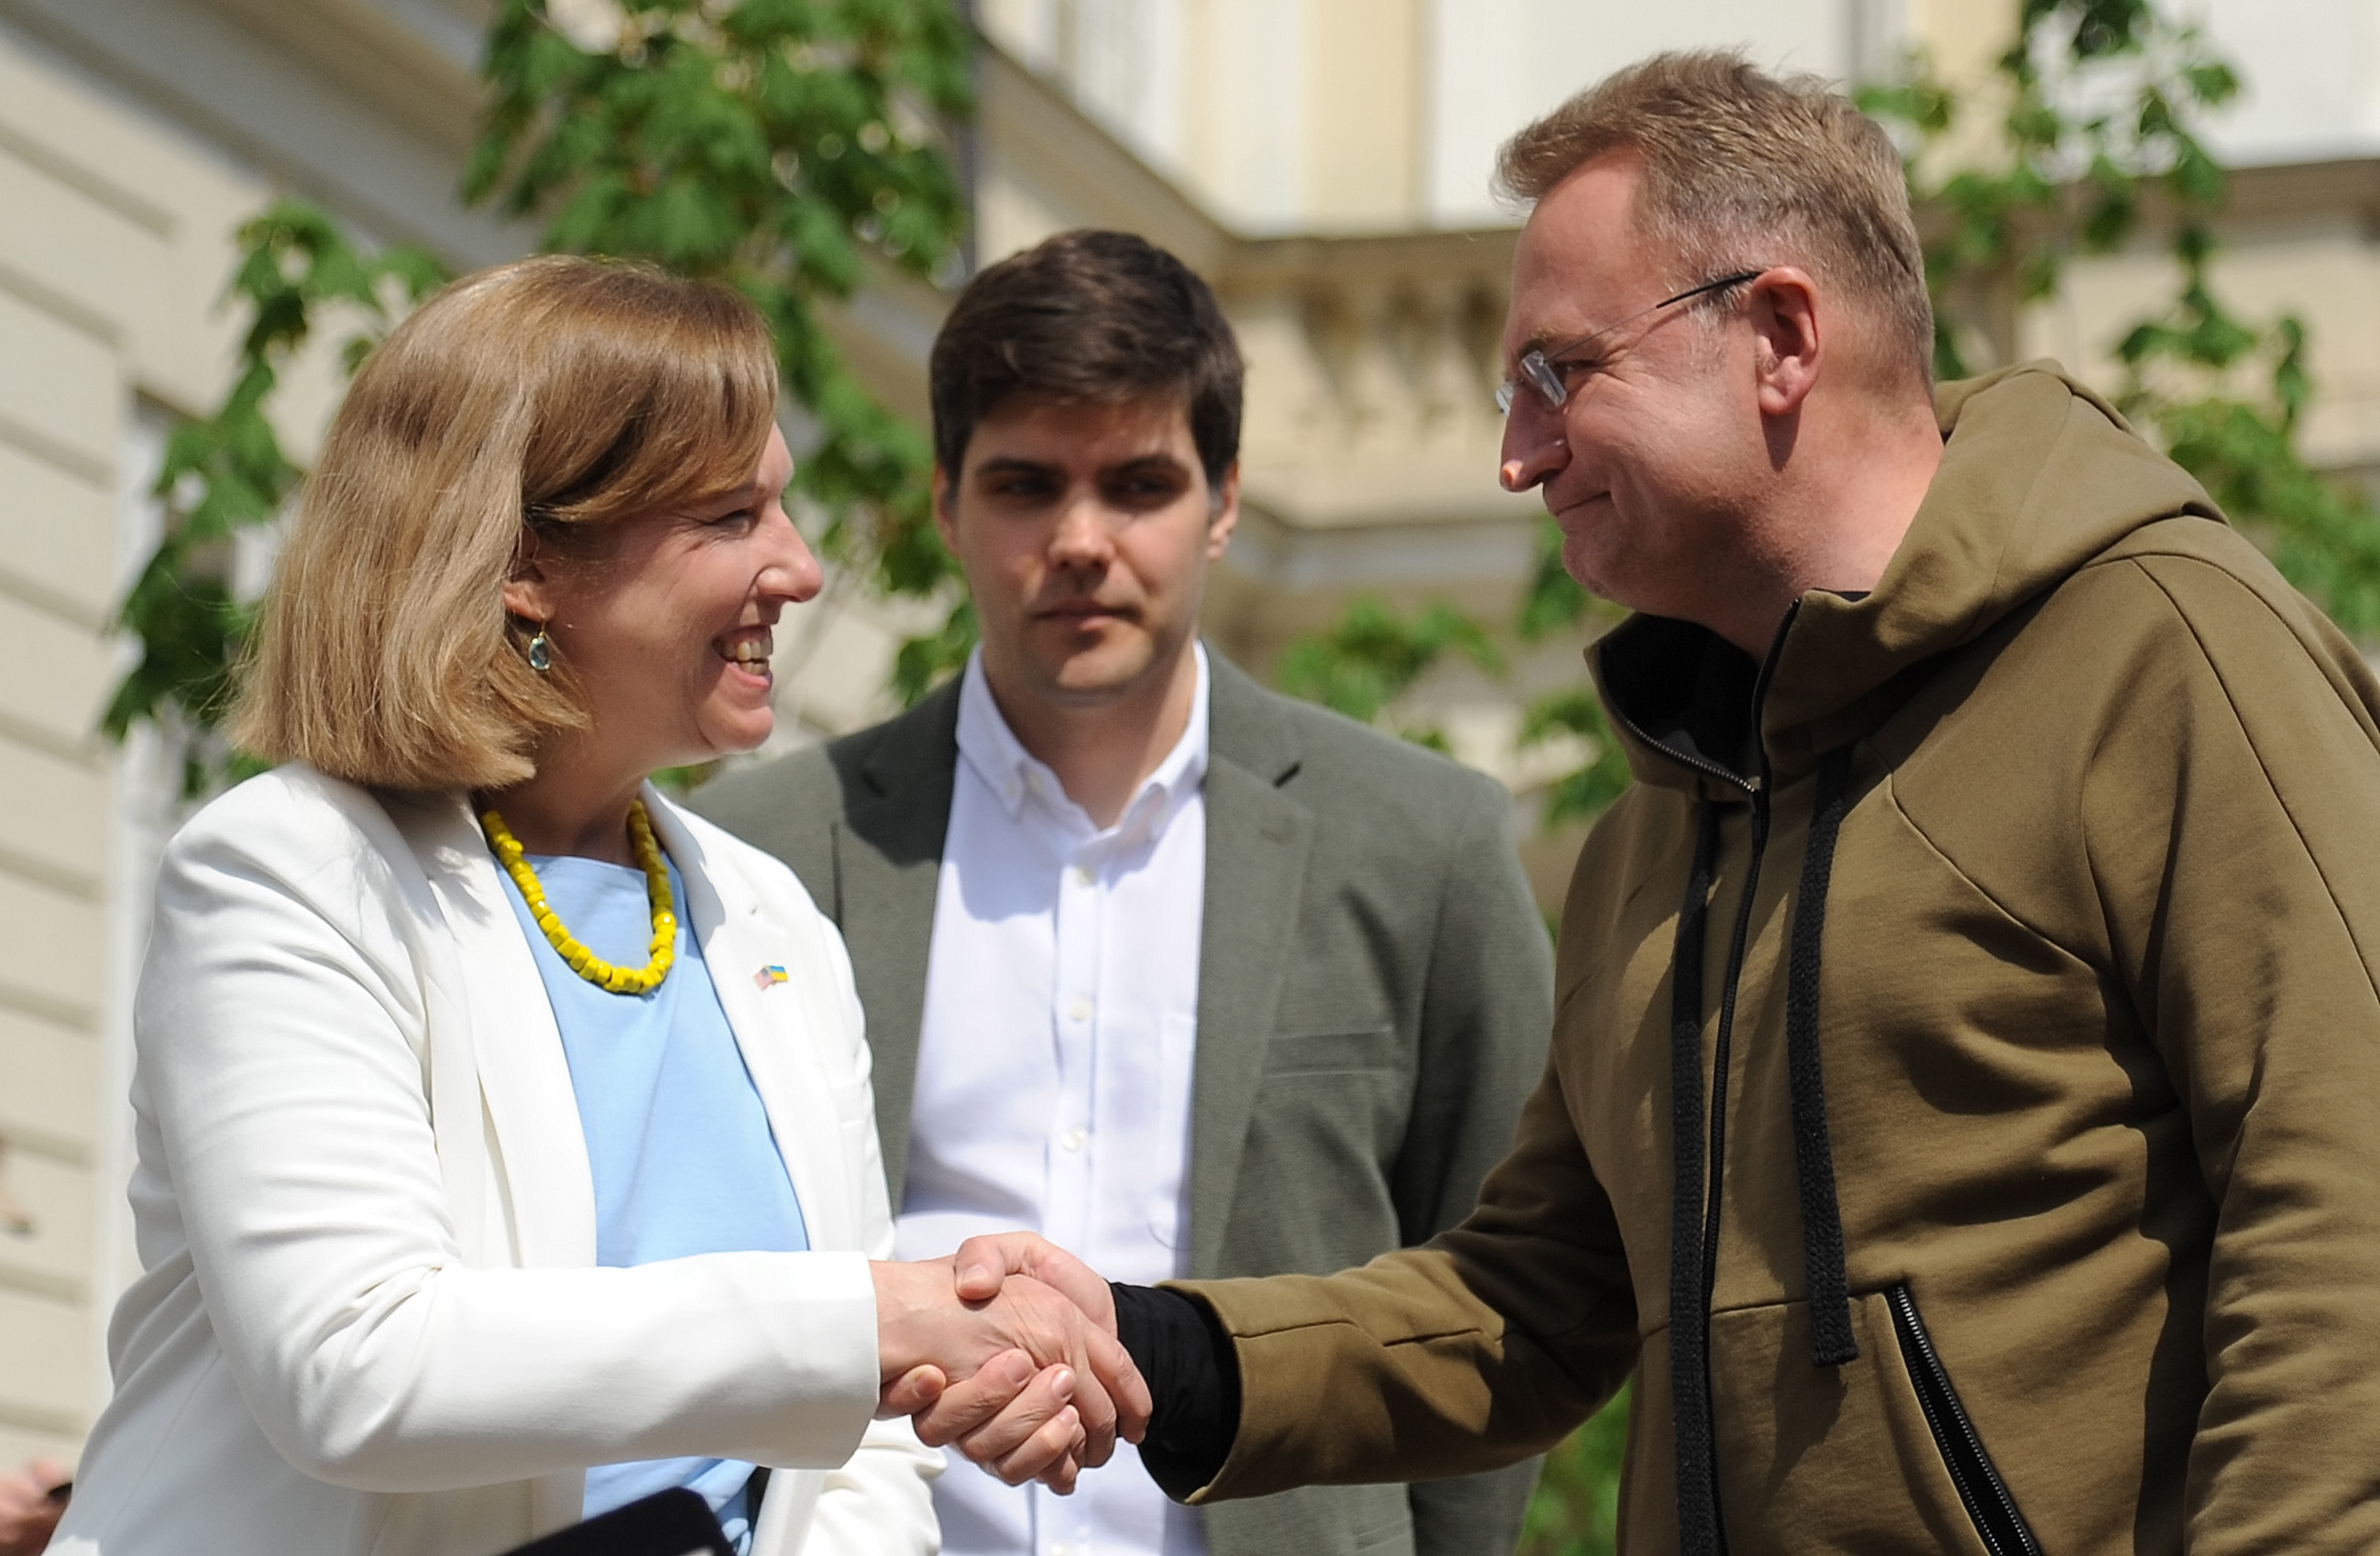 epa09922732 Acting US ambassador to Ukraine Kristina Kvien (L) shakes hands with Mayor of Lviv Andriy Sadovyi (R) during a press briefing in downtown Lviv, Ukraine, 02 May 2022. Kvien said that Washington hopes to return to the Ukrainian capital Kyiv to open its embassy by the end of May.  EPA/MYKOLA TYS